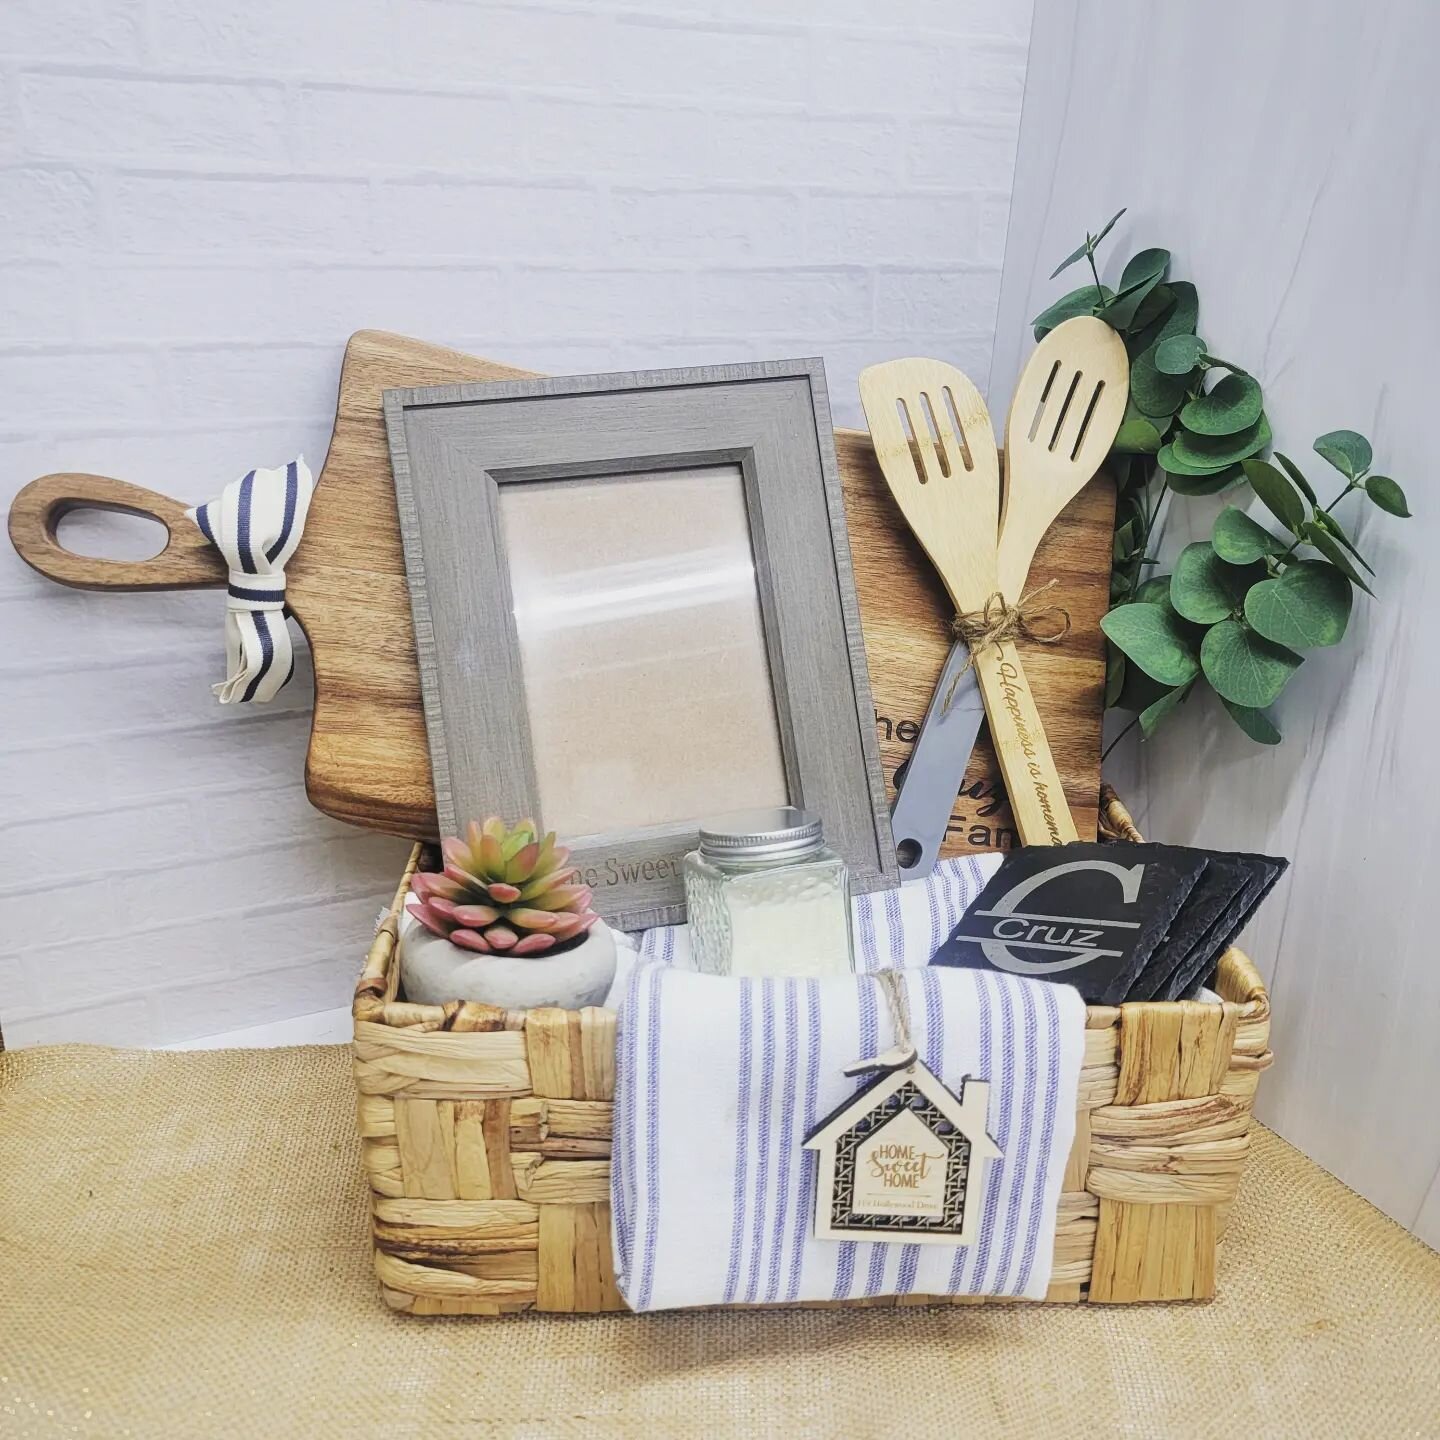 Real Estate/Housewarming gift.  Make your client feel at &quot; Home &quot; with this beautiful personalized Realtor closing basket that they will lovell